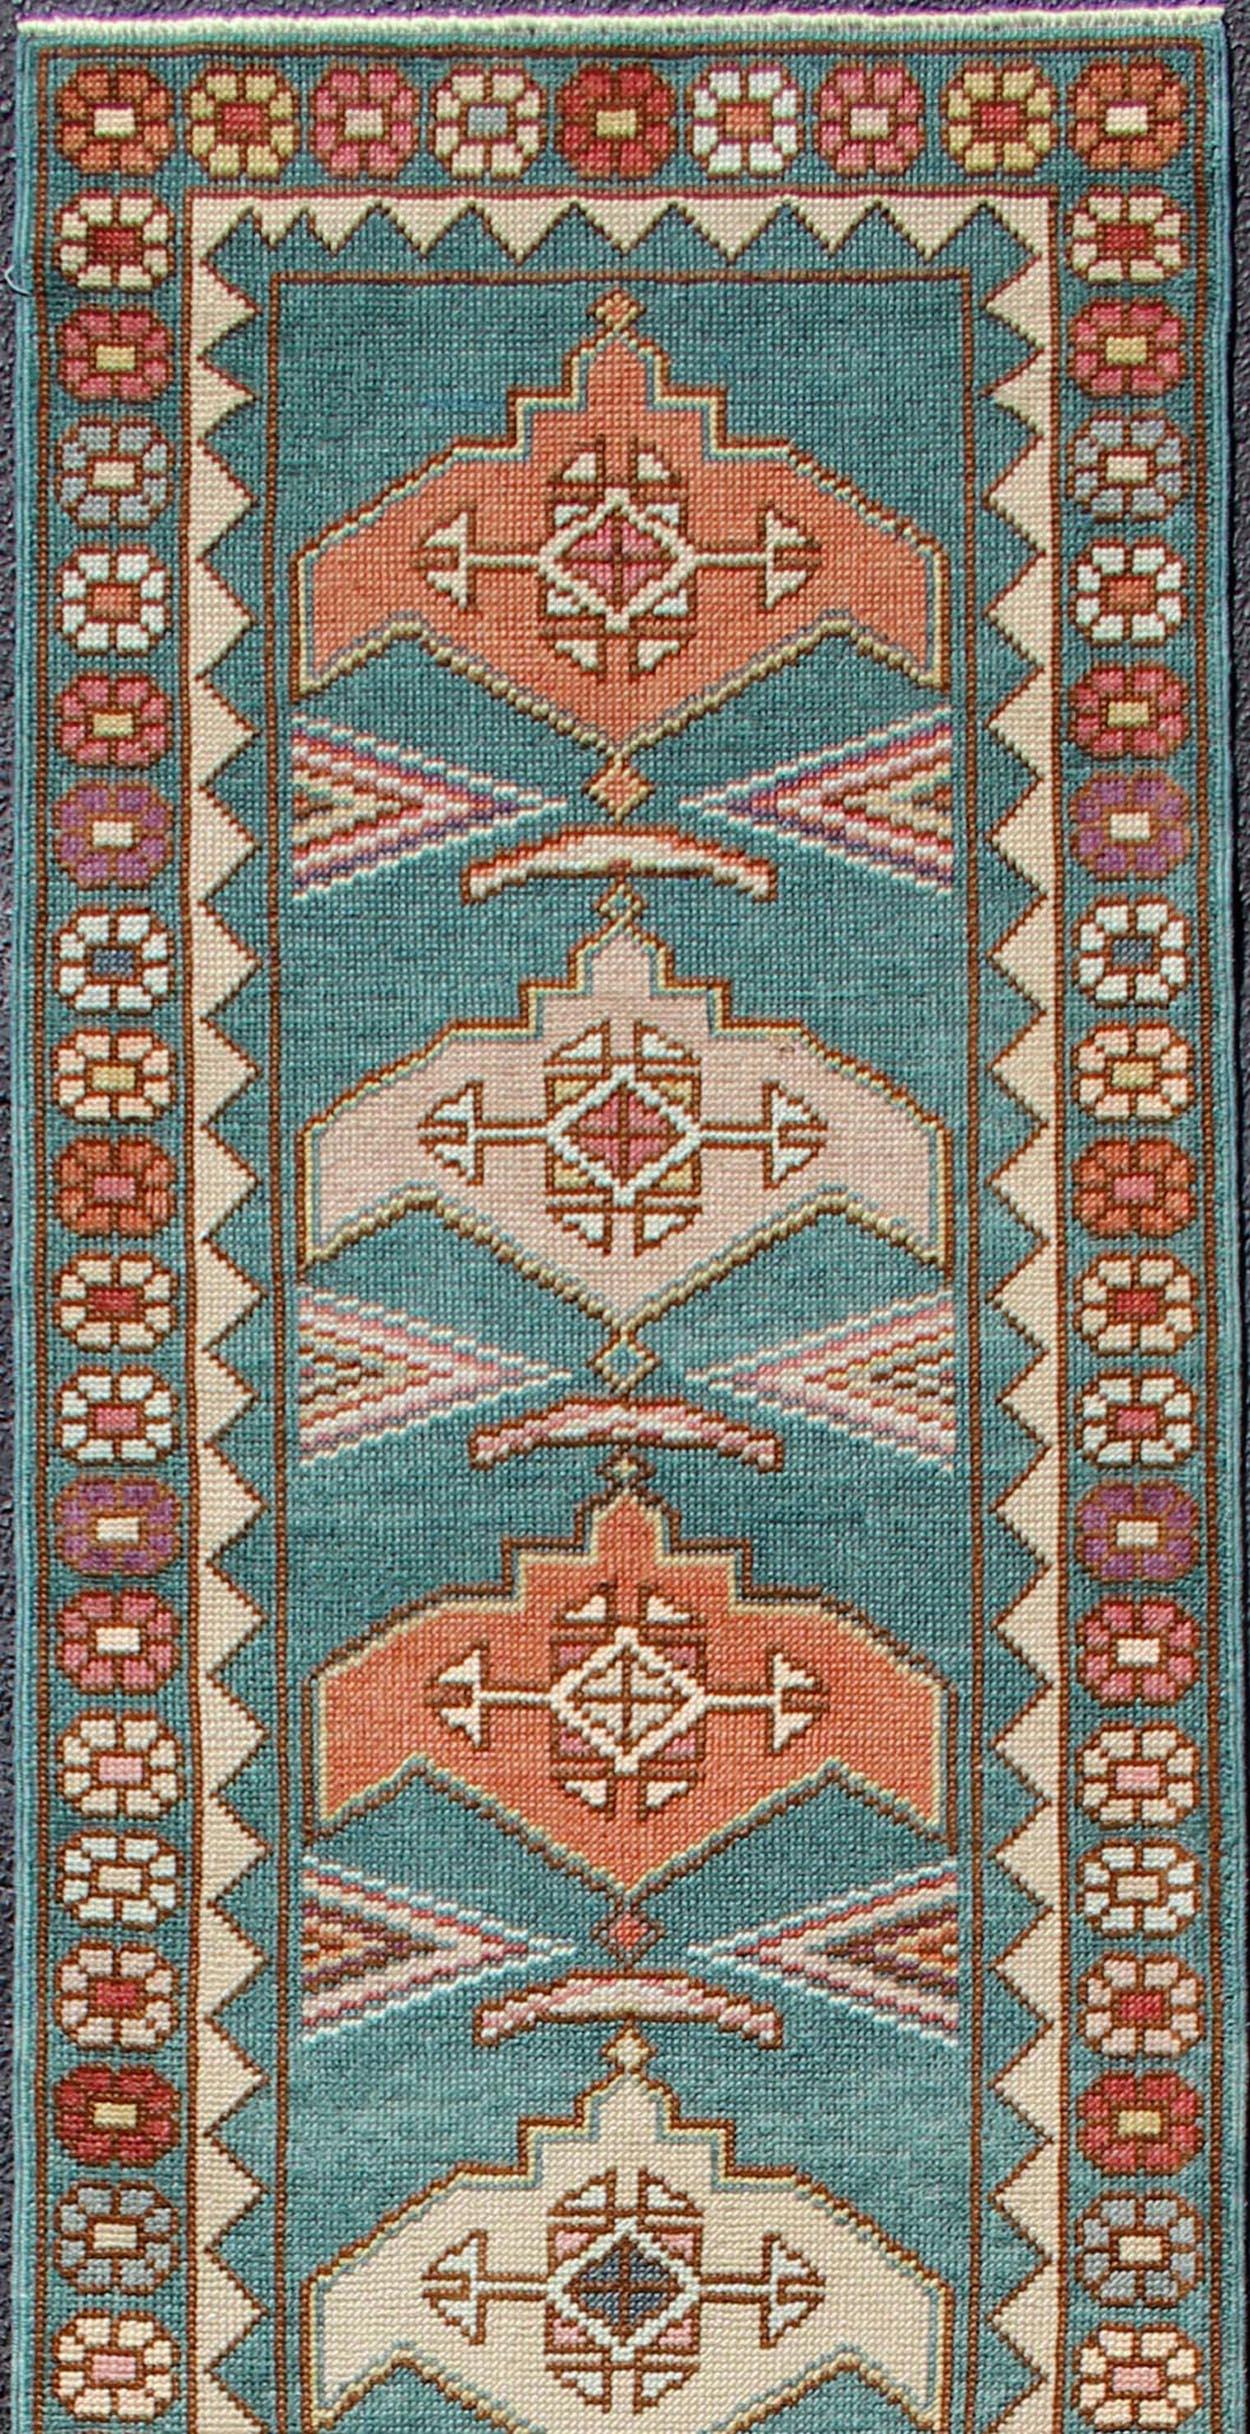 Colorful vintage Turkish oushak runner with repeating medallion geometric design in teal color background, rug EN-179682, country of origin / type: Turkey / Oushak, circa 1940

This vintage Oushak runner (circa mid-20th century) features a unique